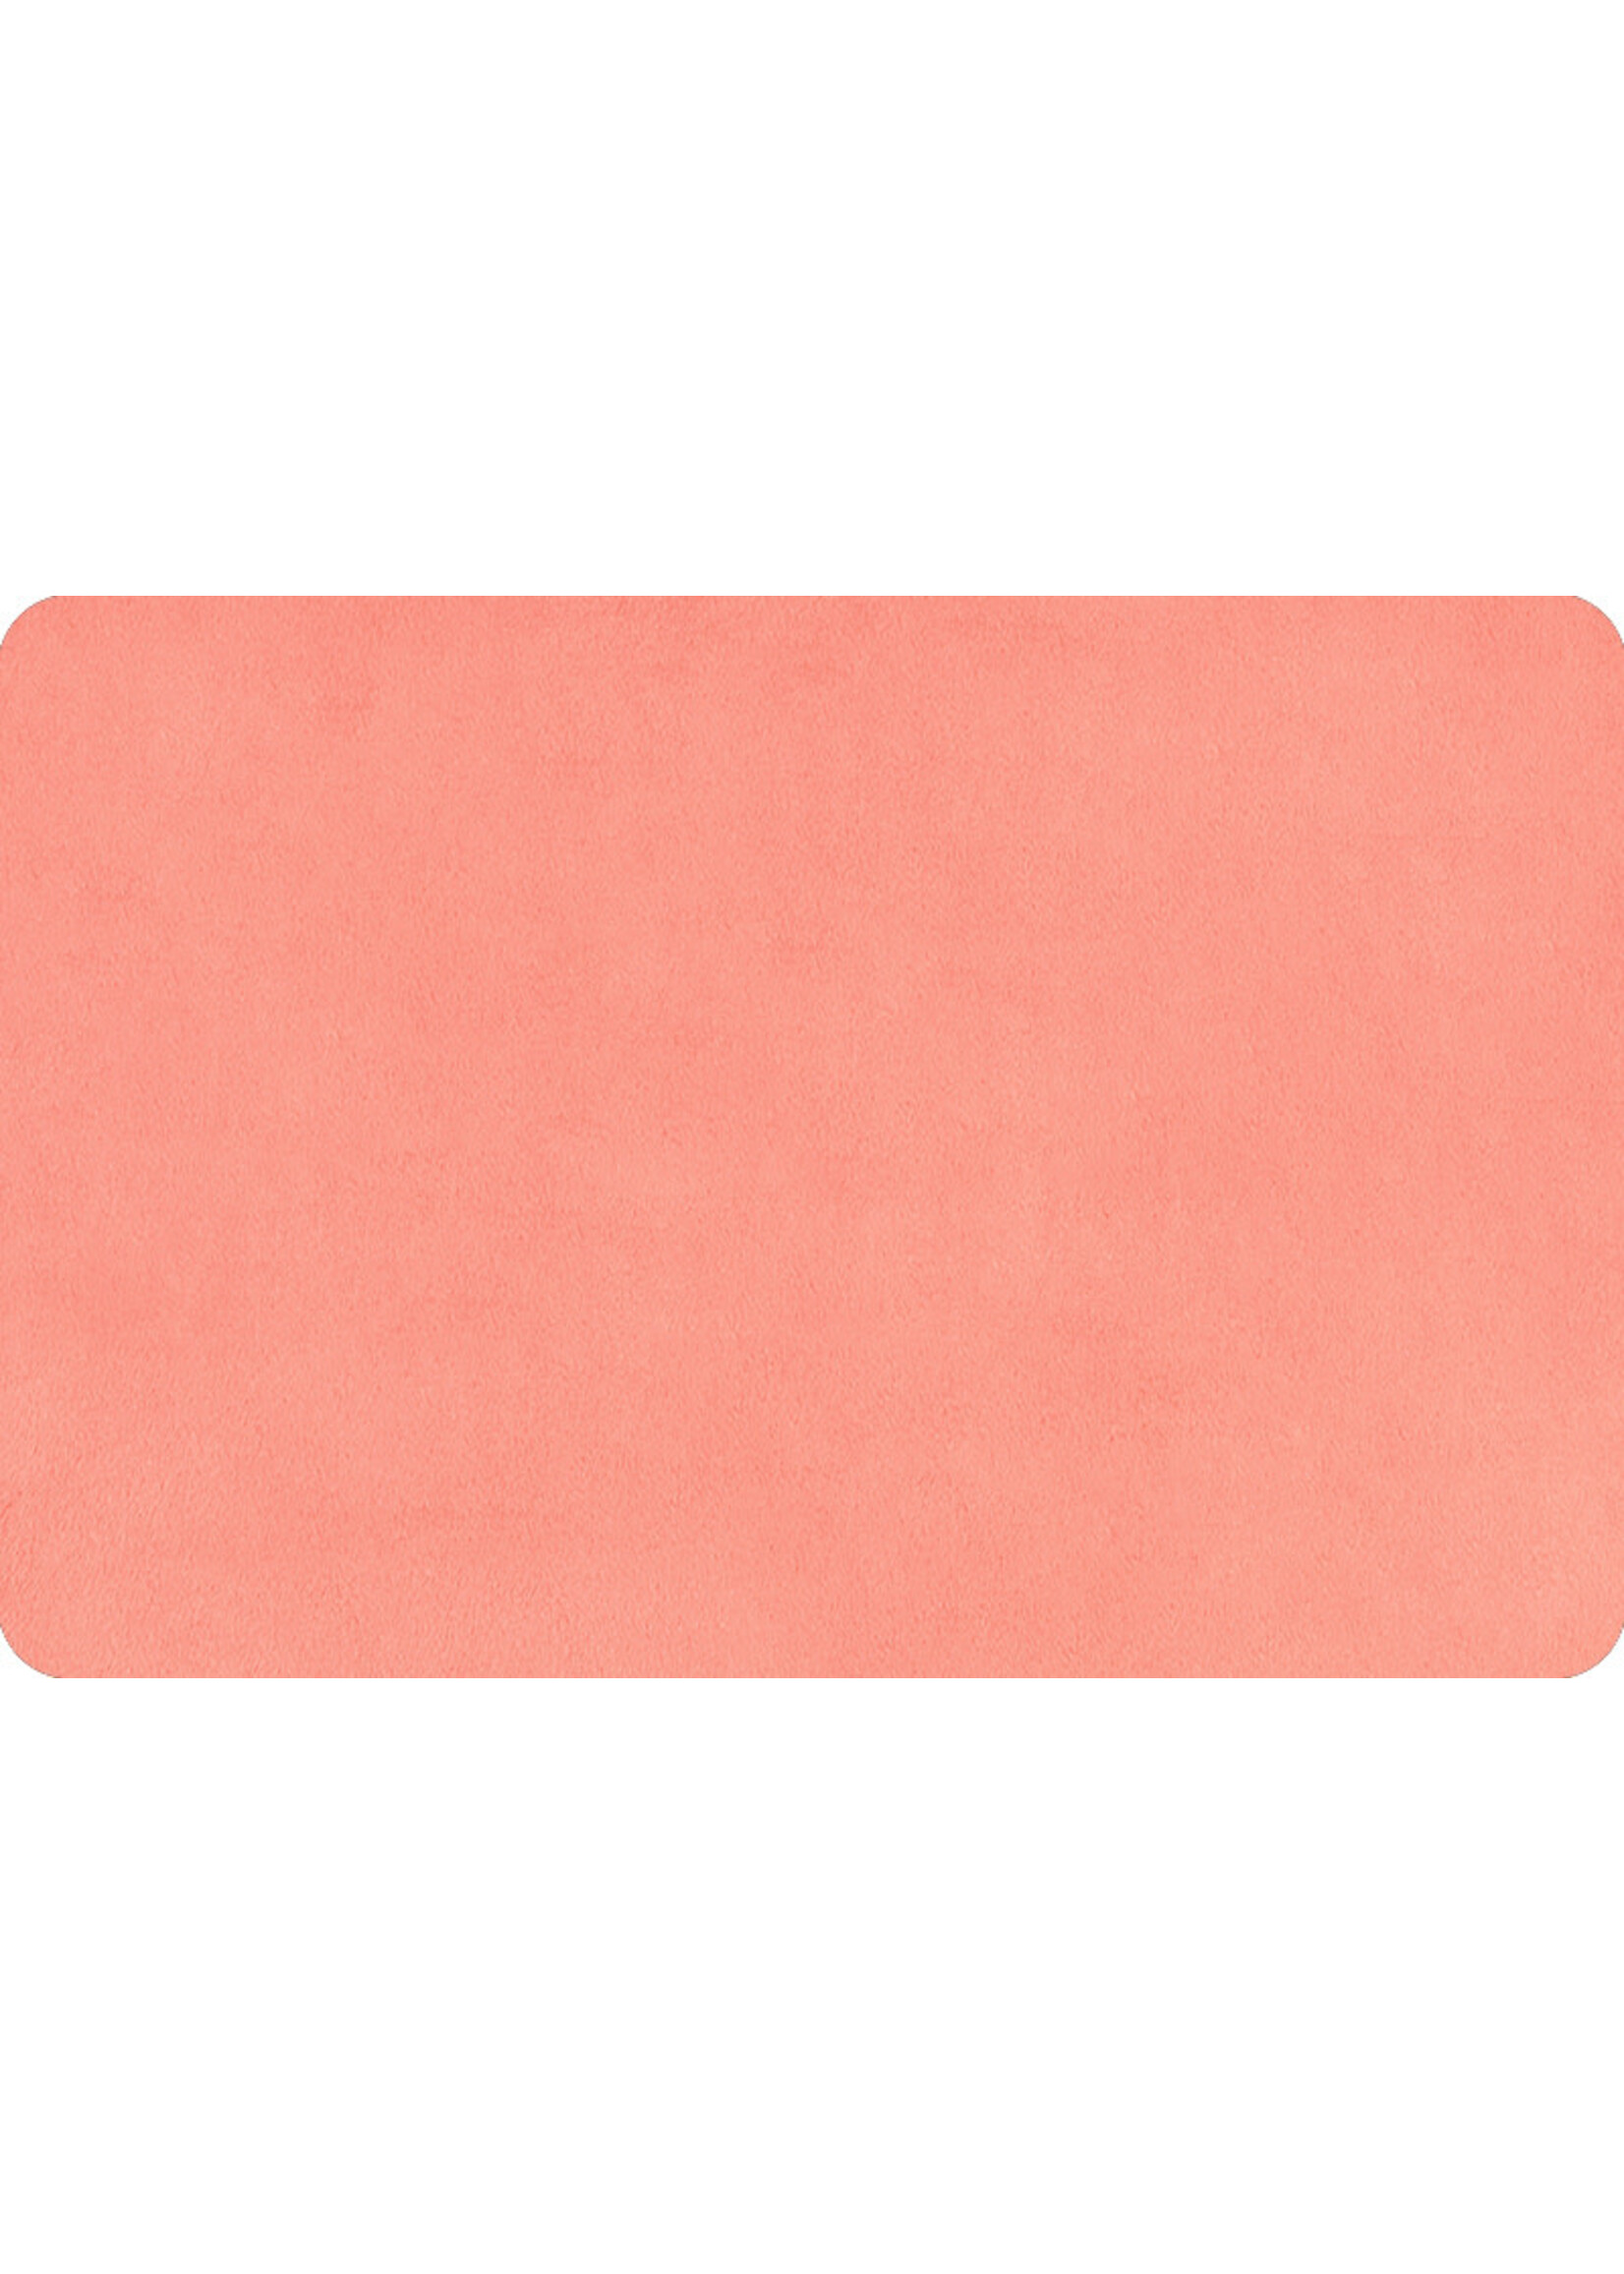 Shannon Fabrics Minky, Extra Wide Solid Cuddle3, 90" Coral, (by the inch)